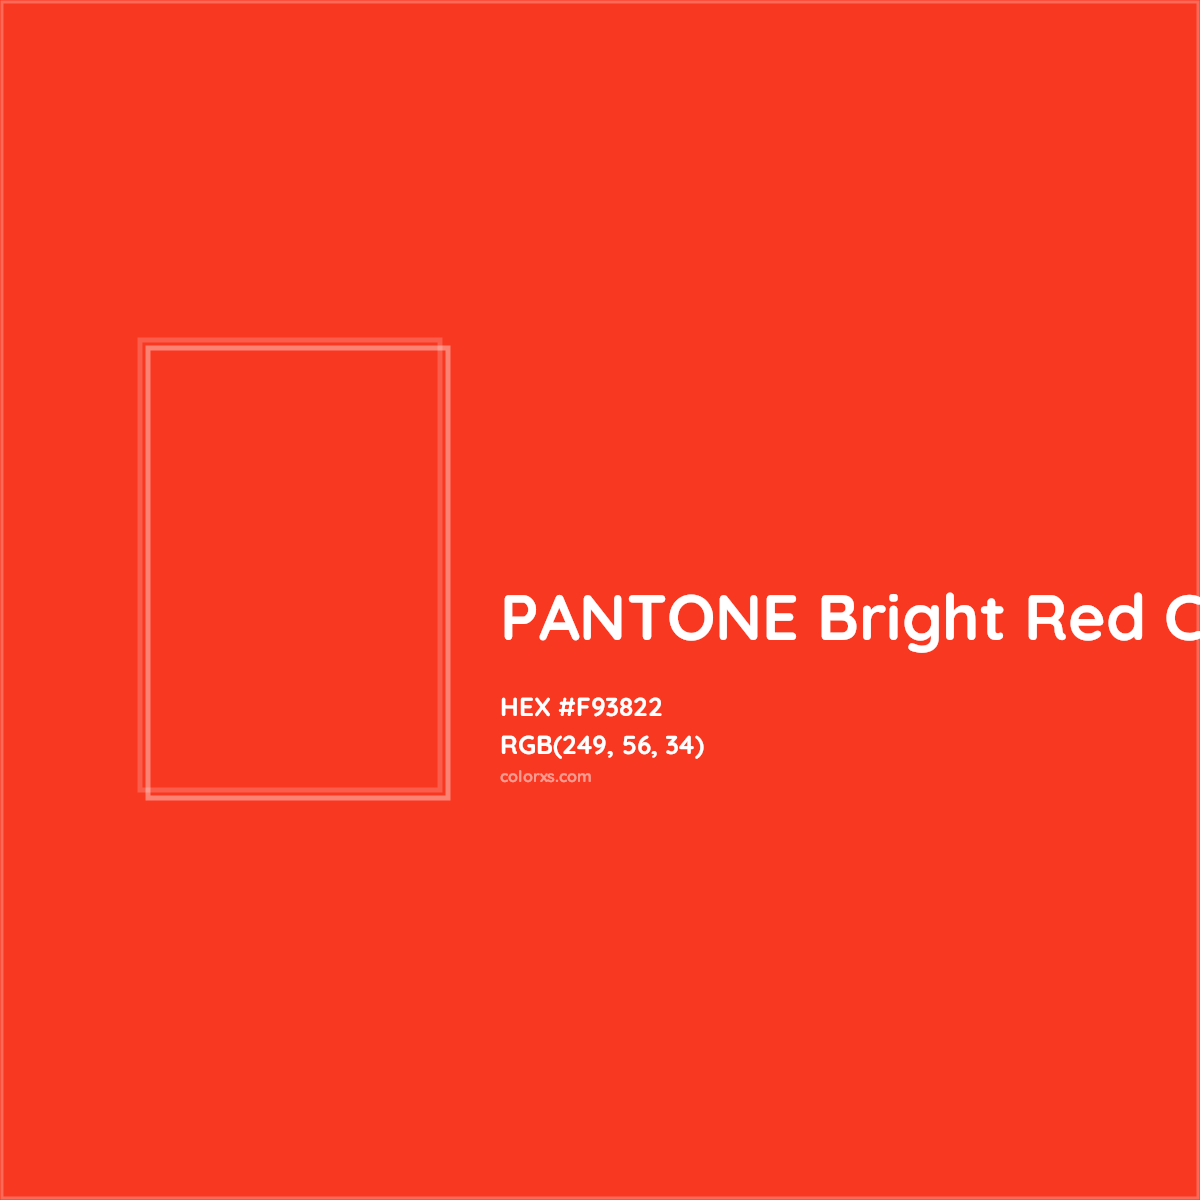 About Pantone Bright Red C Color Color Codes Similar Colors And